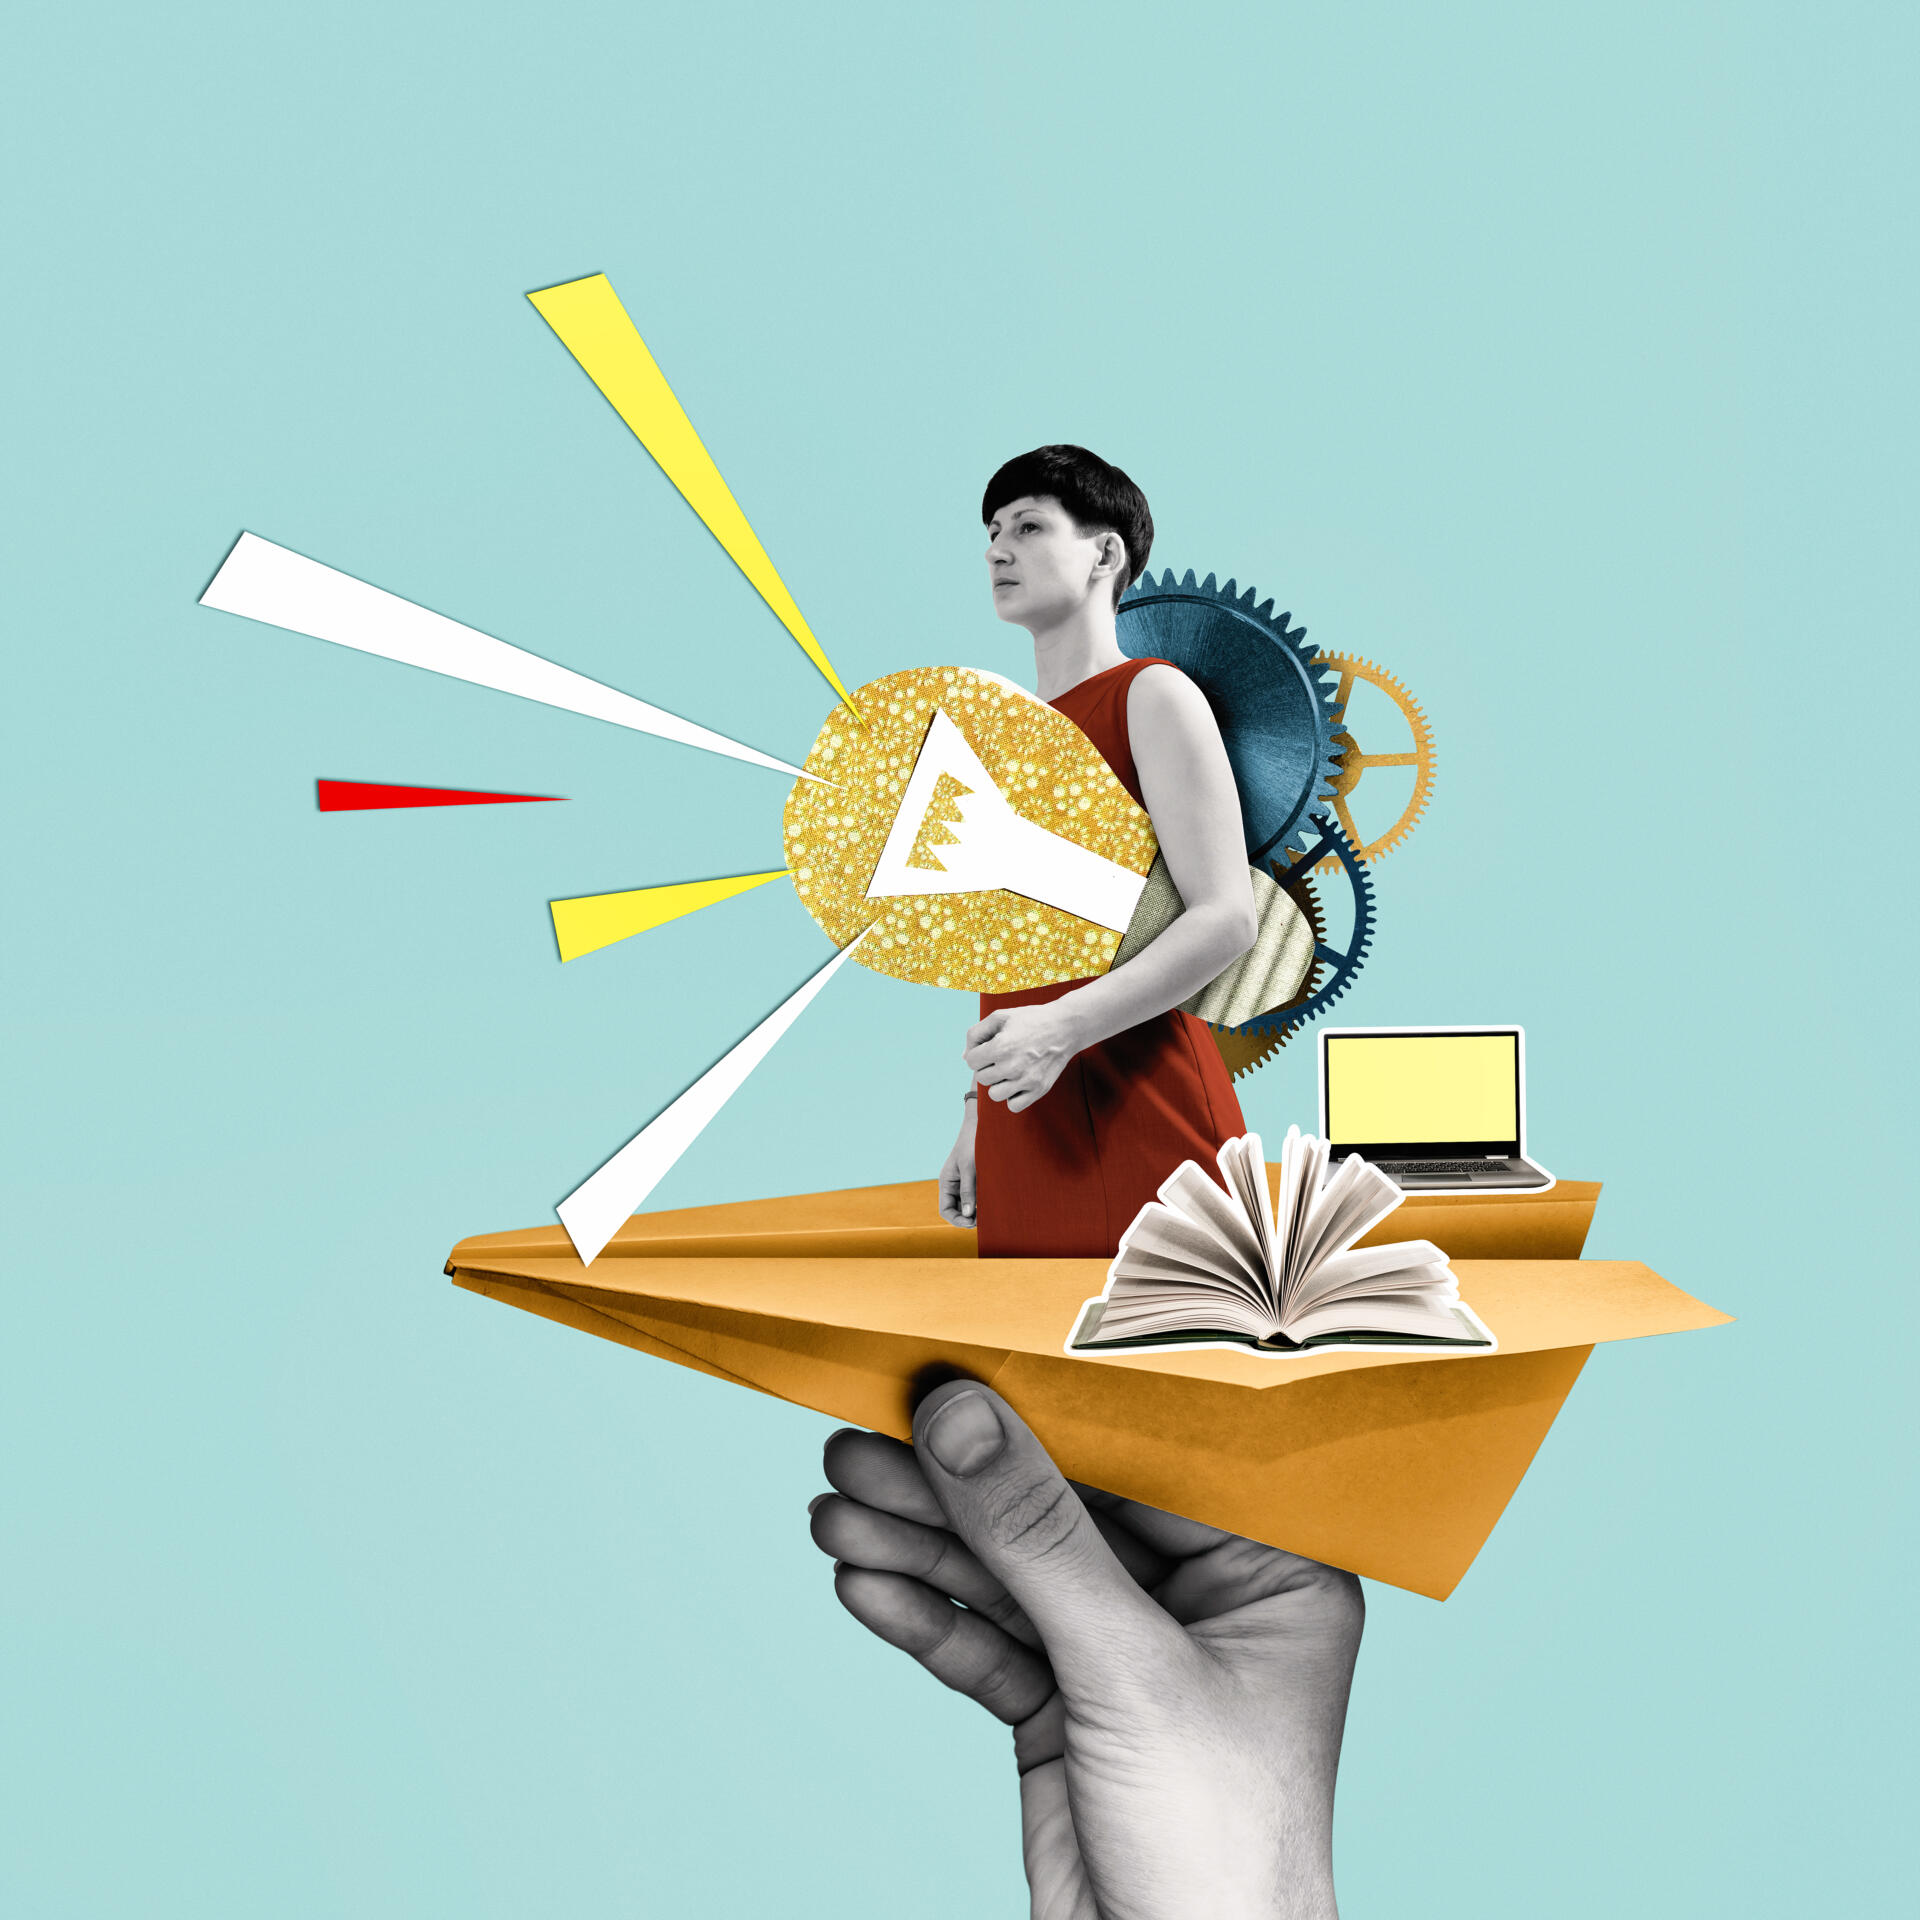 Woman with a light bulb in a paper airplane. Creativity and uniqueness in business and education. Art collage.